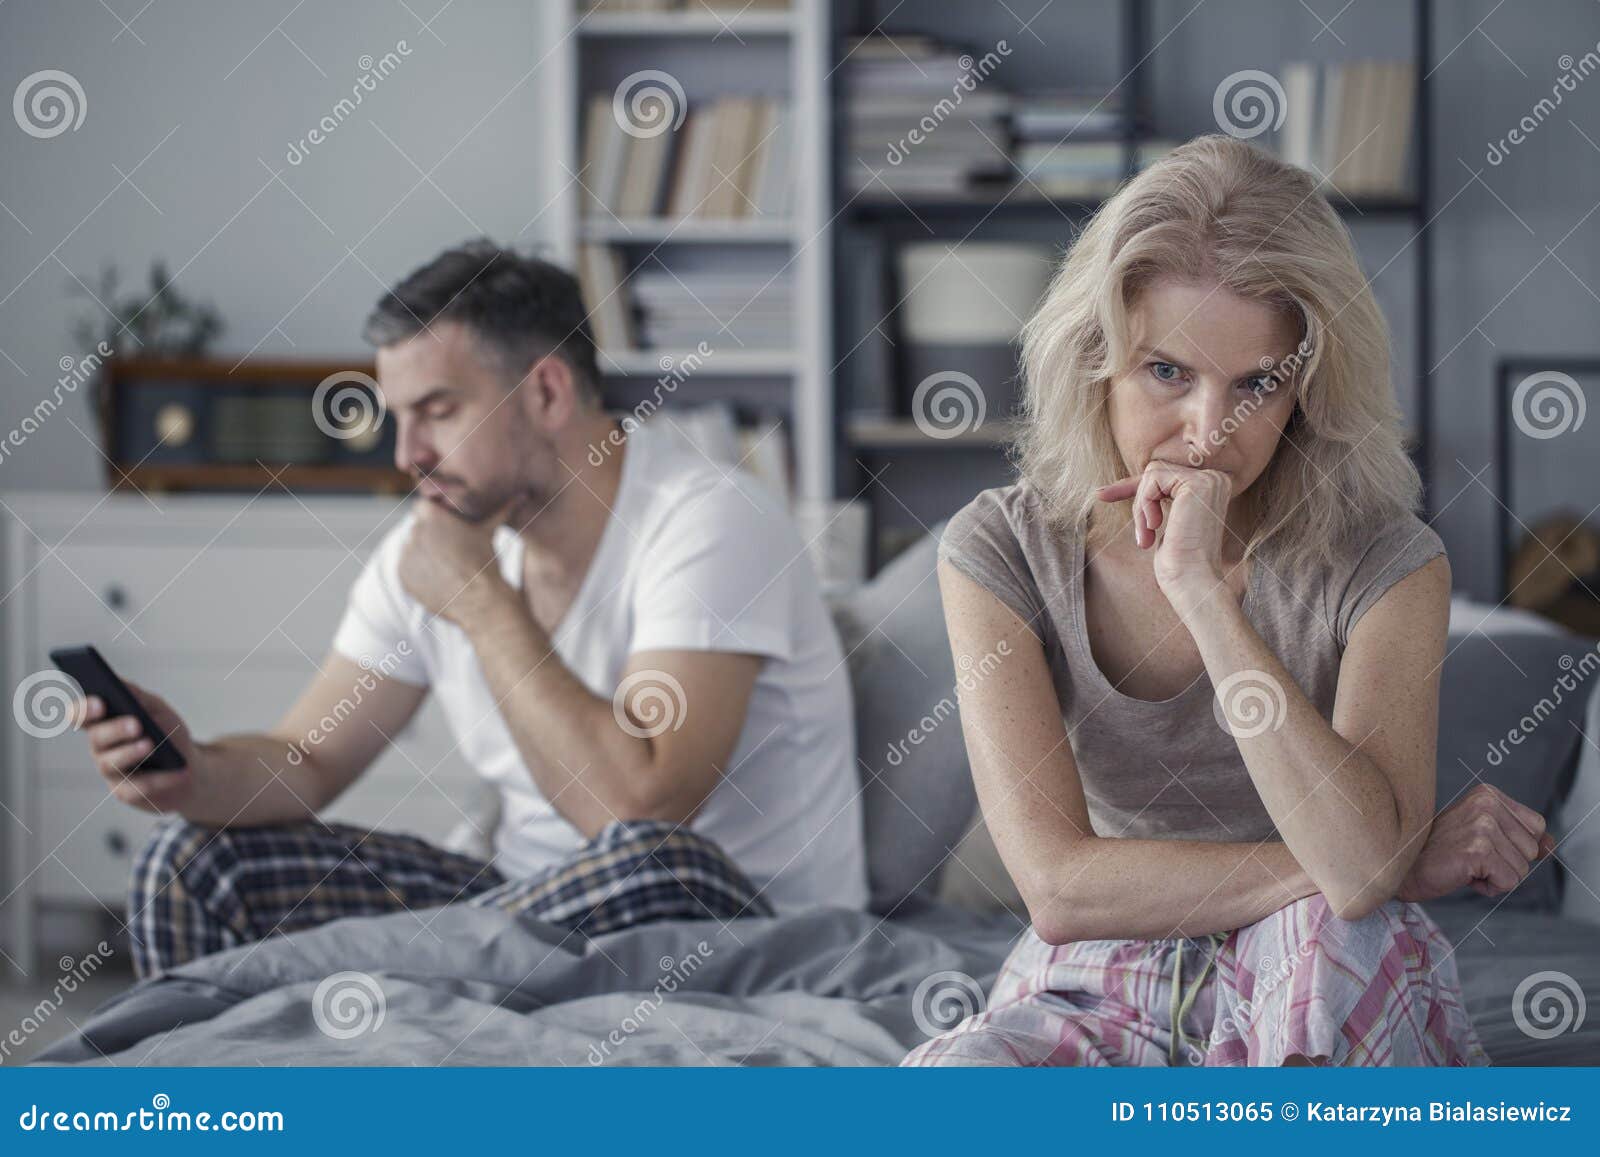 Sad Wife and Cheating Husband Stock Image picture